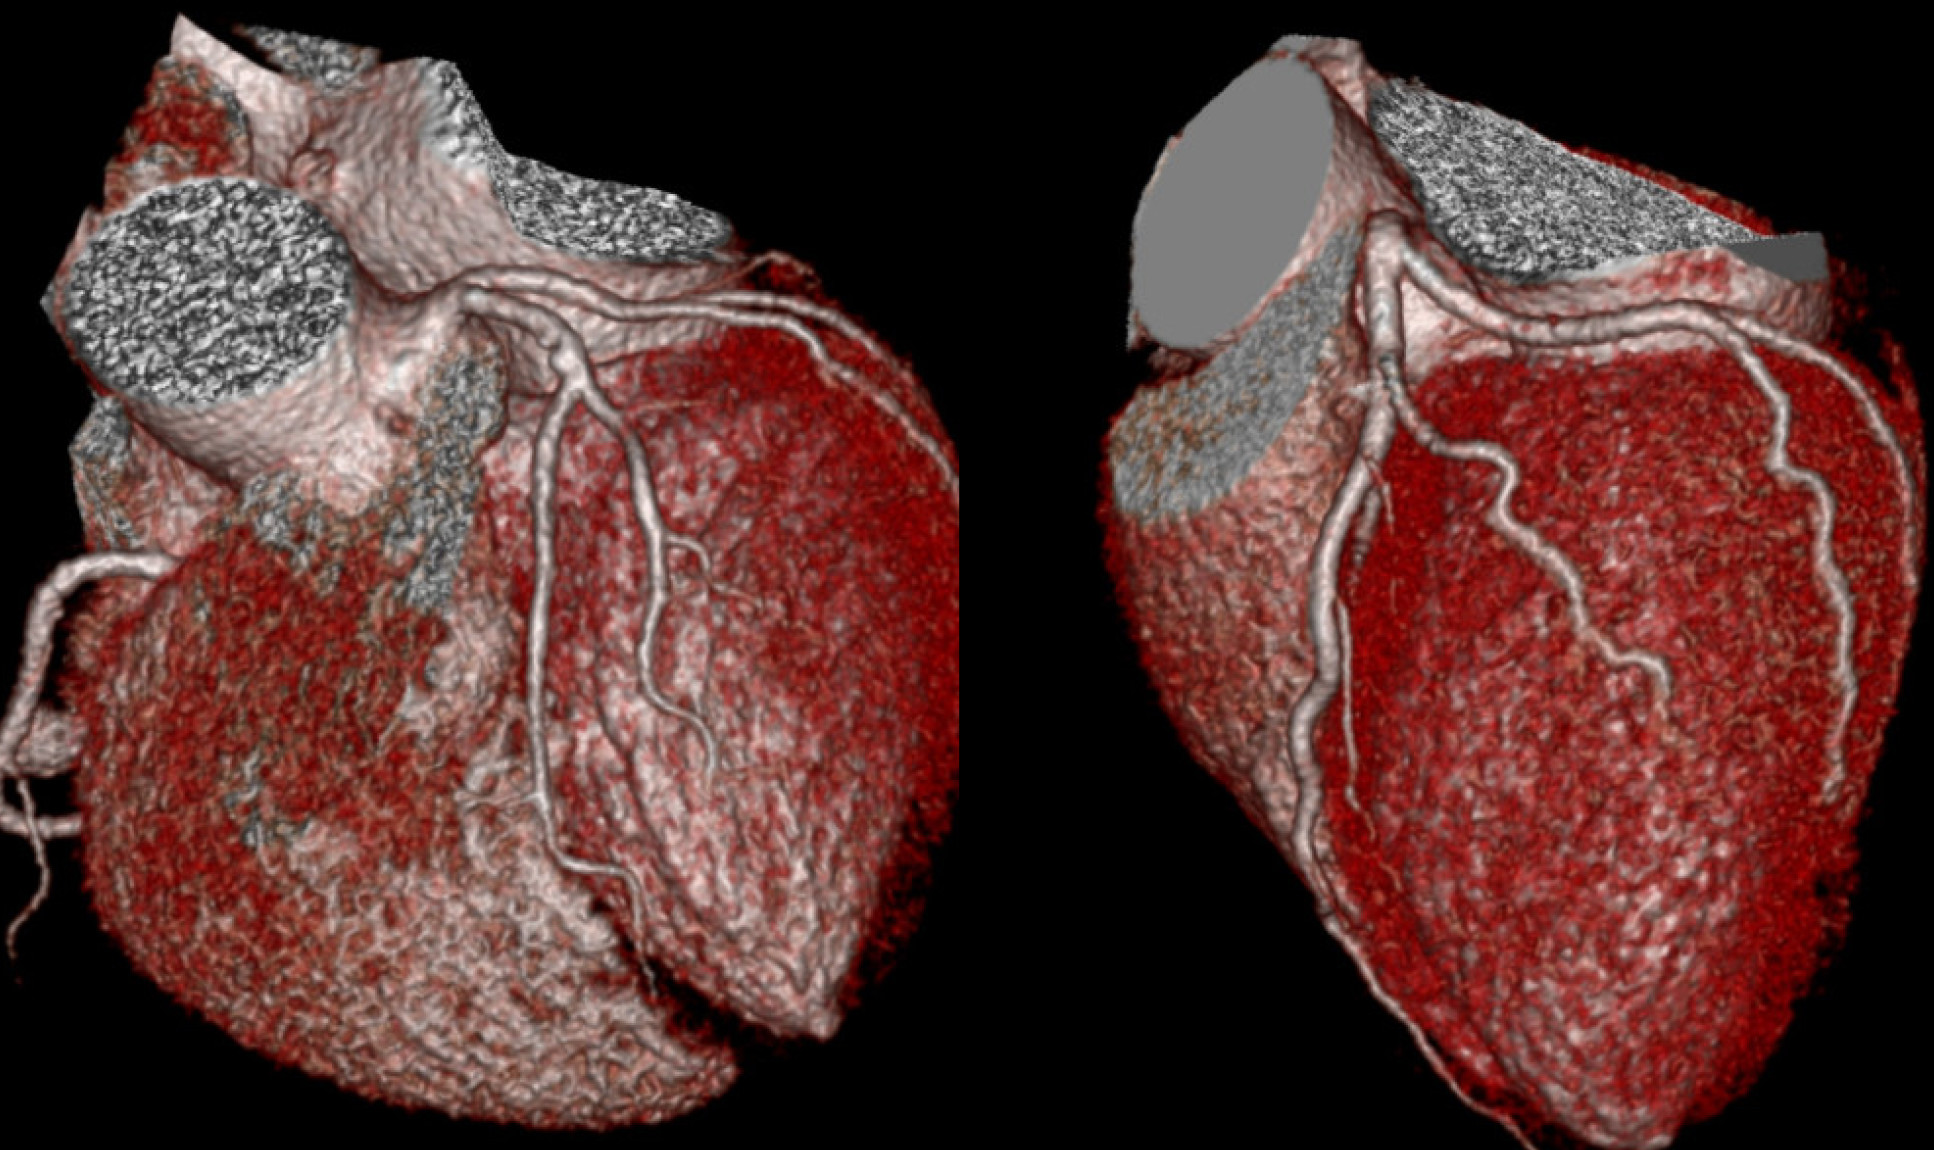 3D reconstruction of a healthy human heart and of the heart of a patient who suffers from DCM (CT scans).